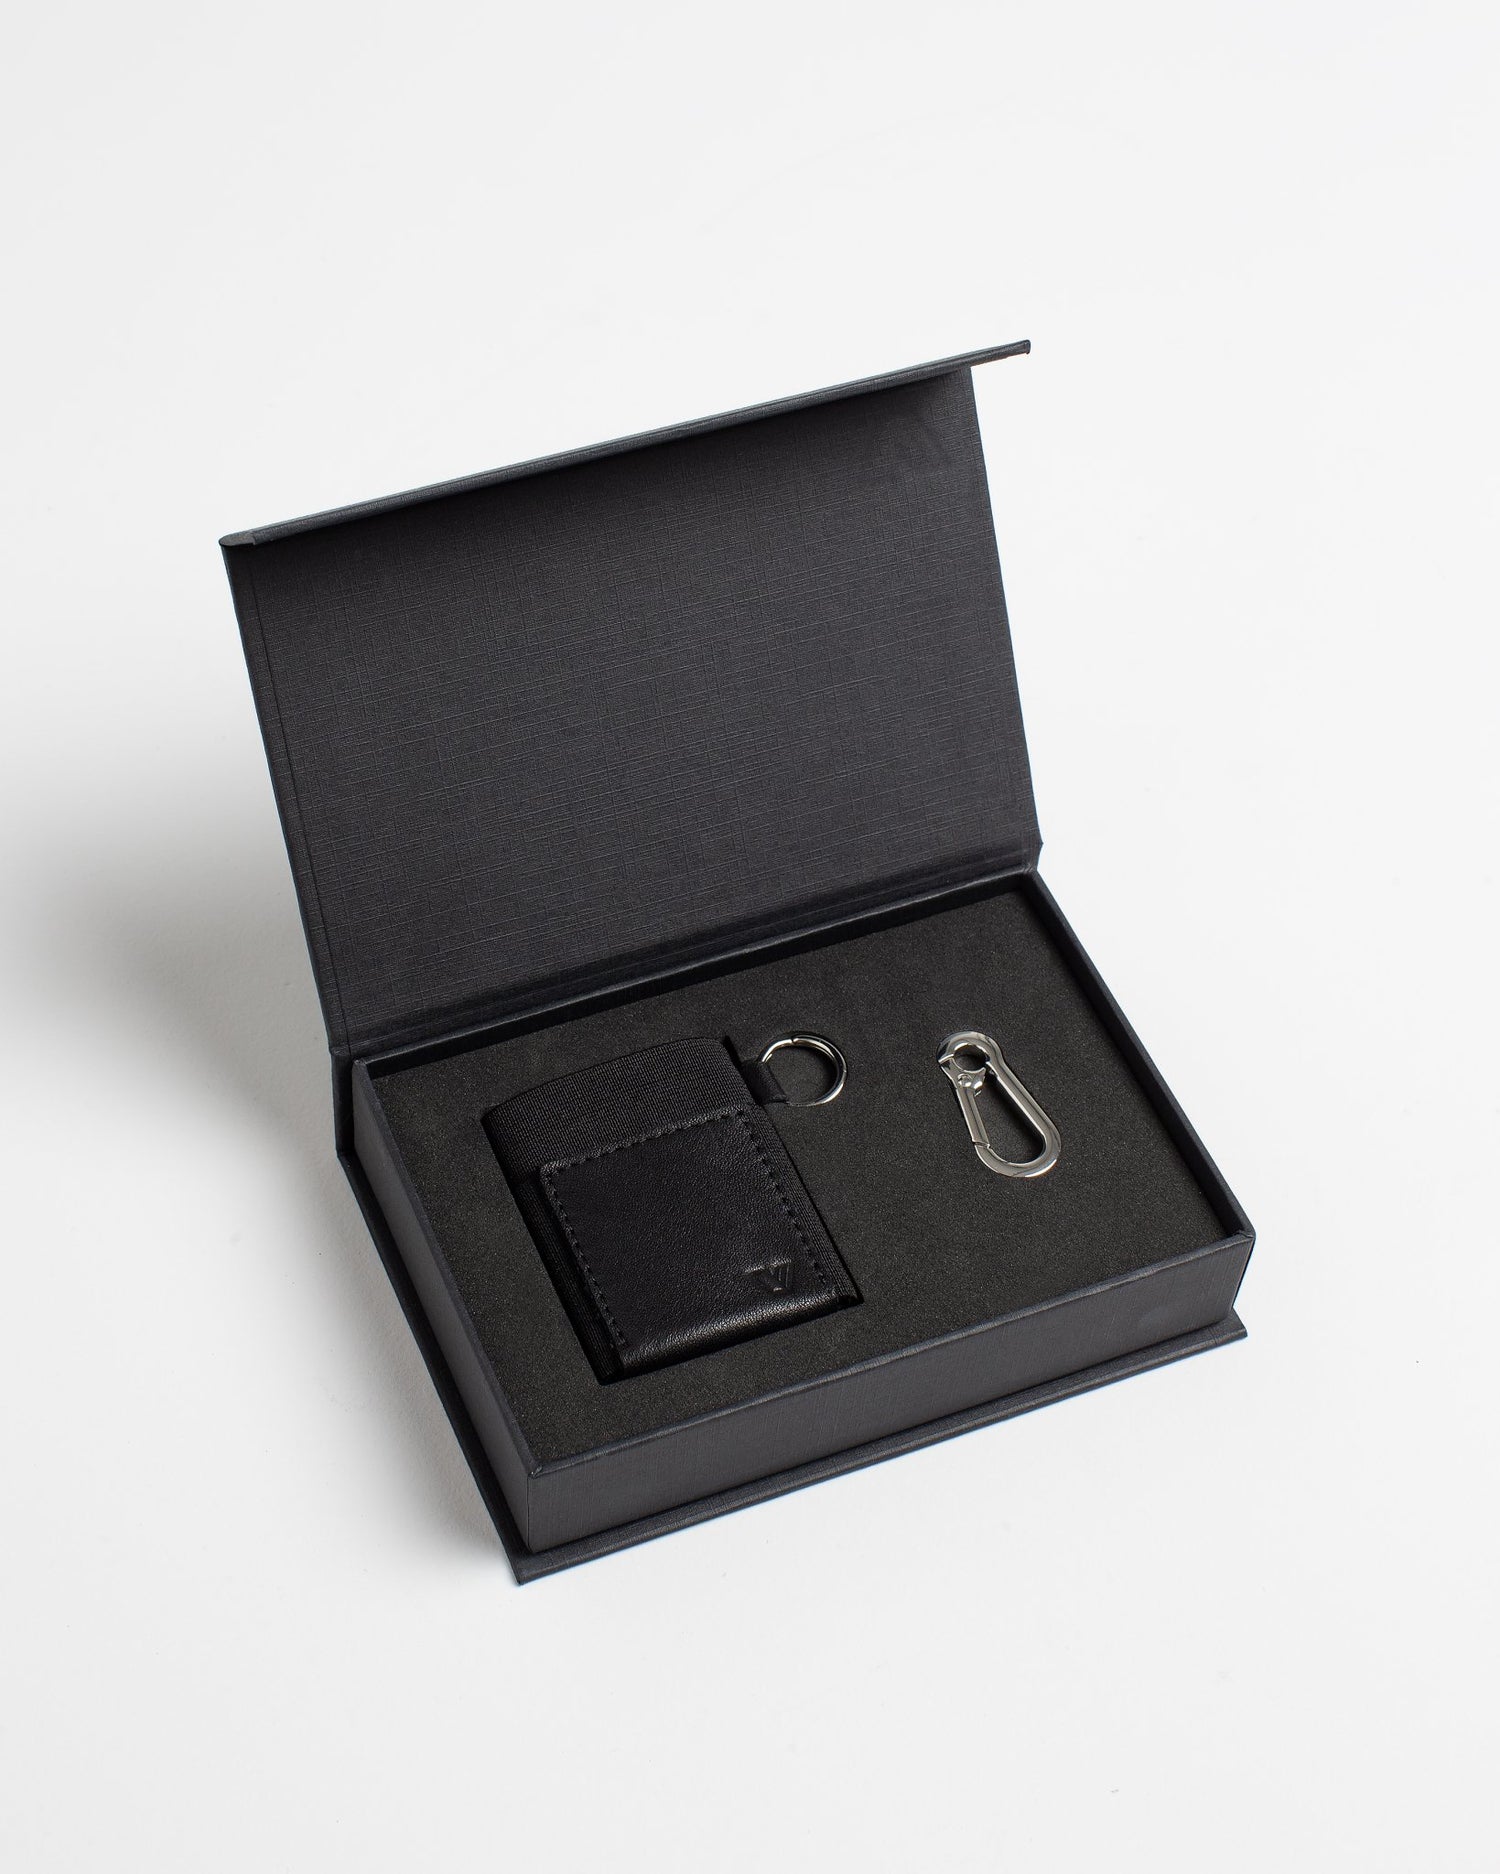 Black leather minimalist wallet in gift box